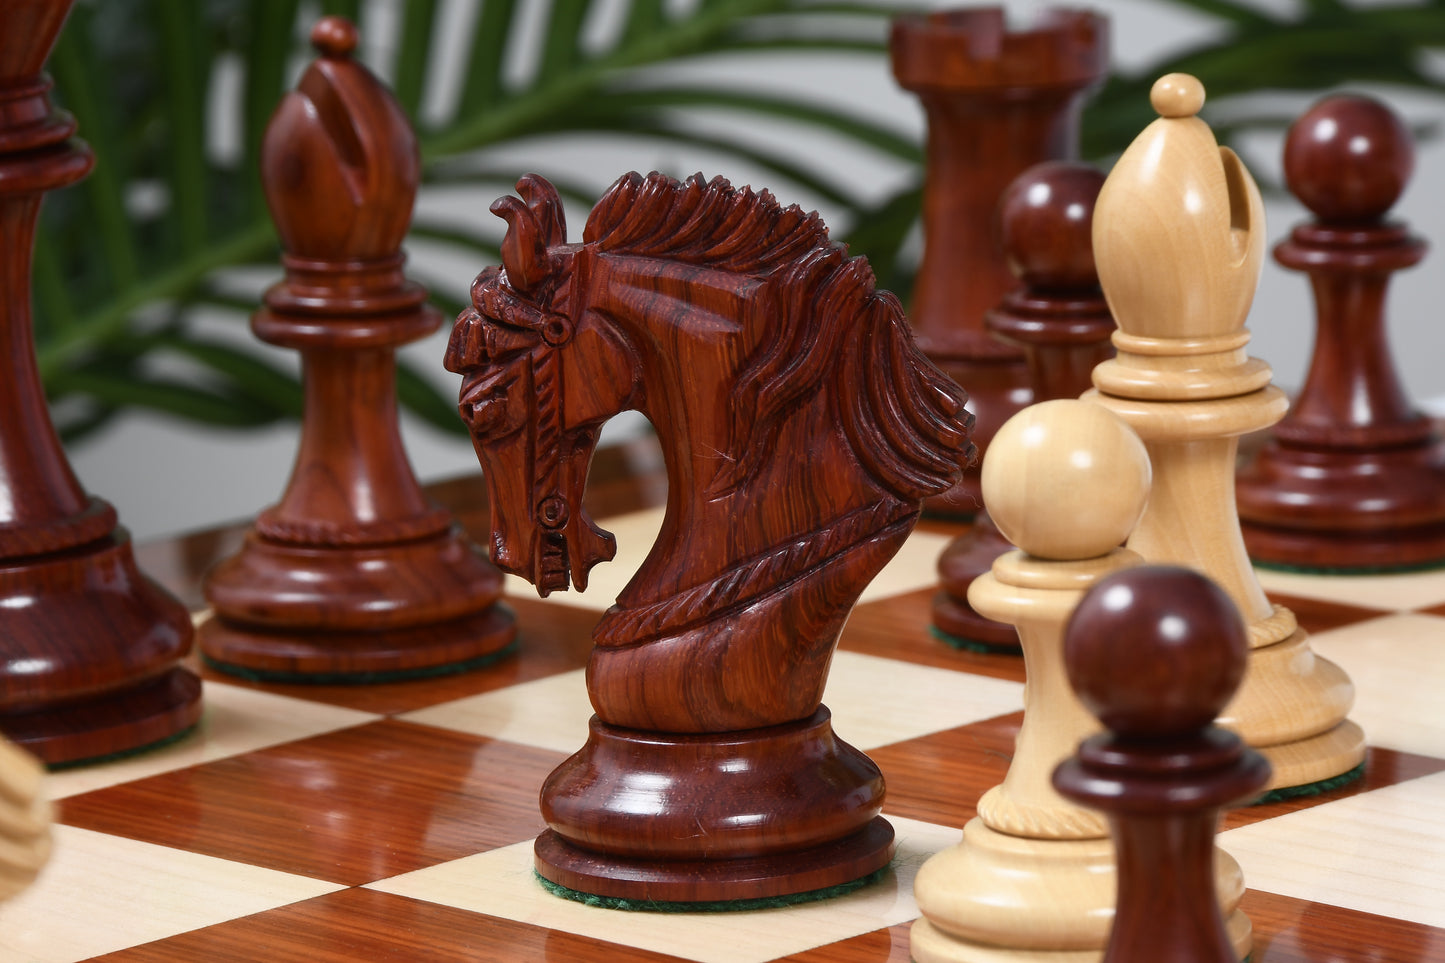 The Excalibur Luxury Artisan Series Chess Pieces in Bud Rosewood / Box Wood - 4.6" King